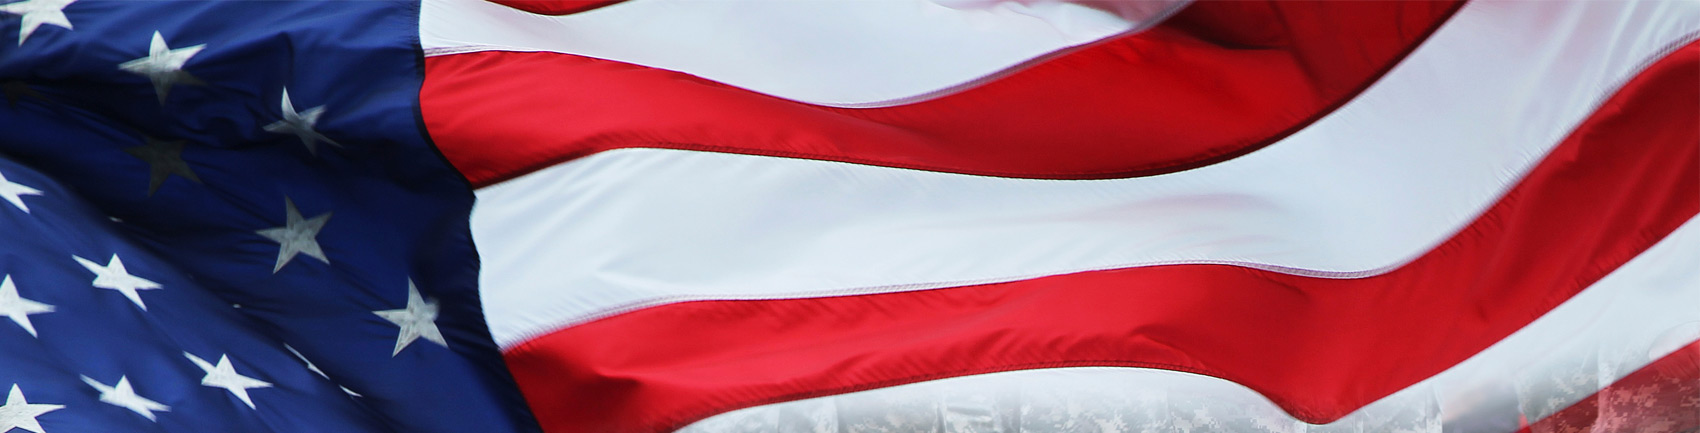 Close up view of the American flag.